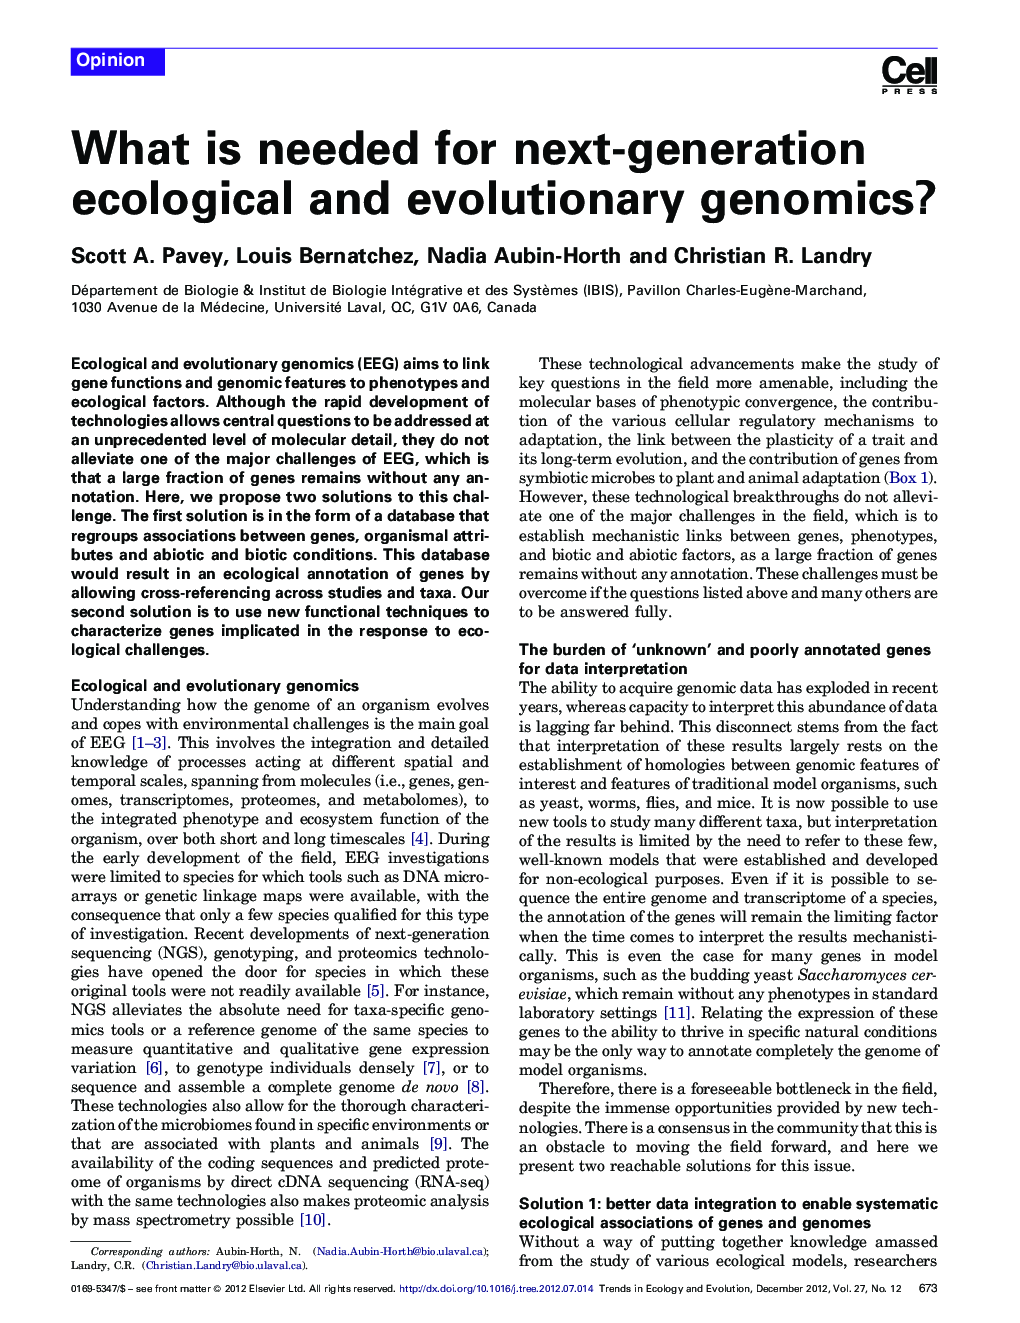 What is needed for next-generation ecological and evolutionary genomics?